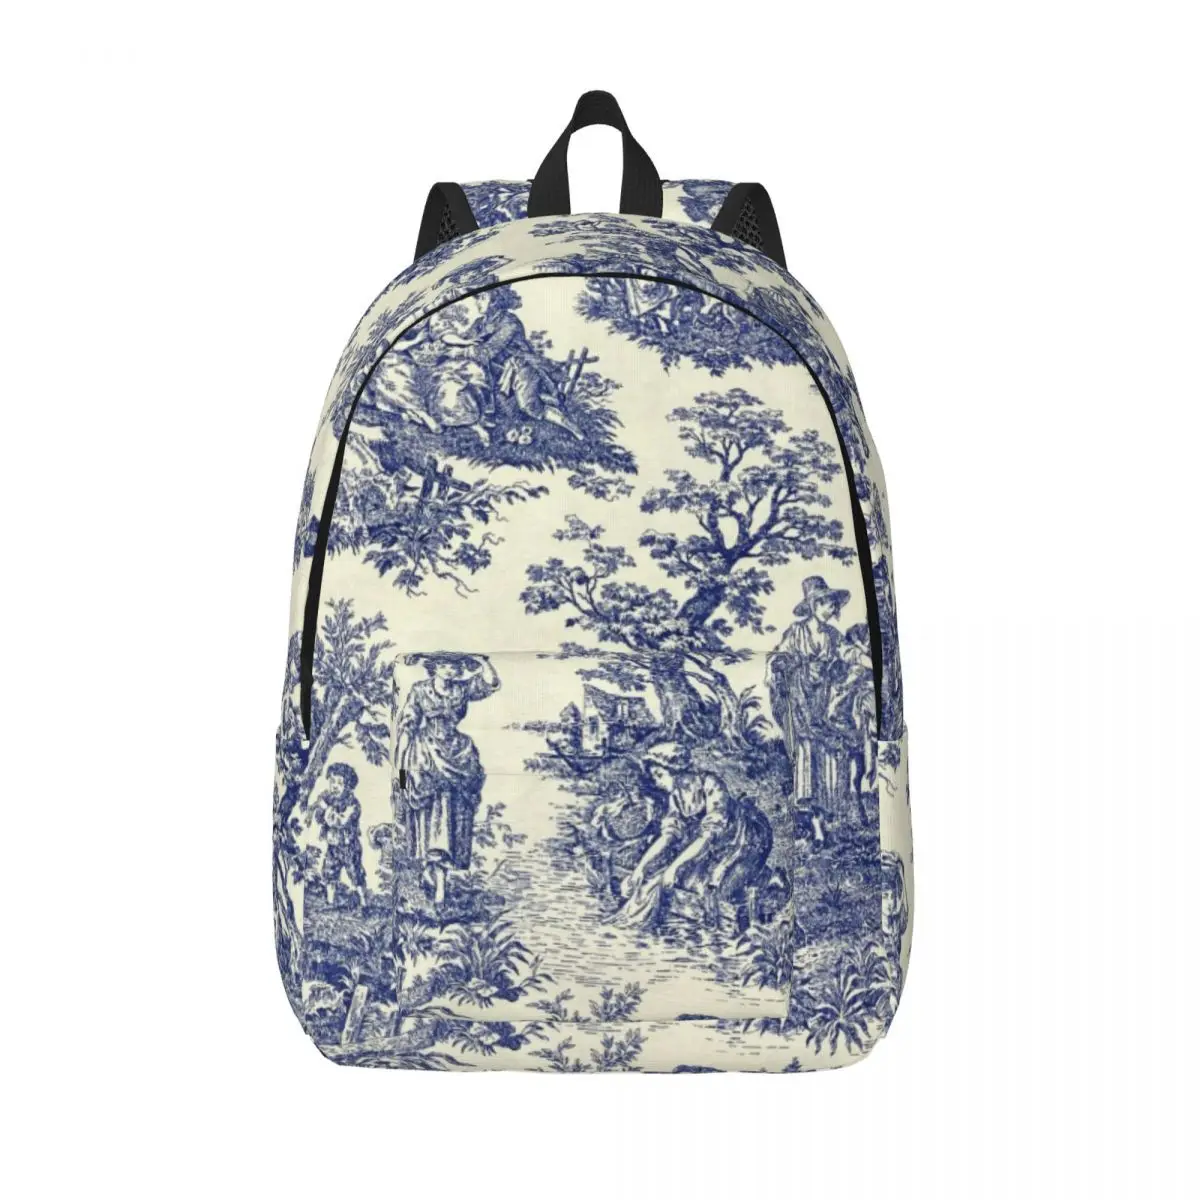 

Toile De Jouy Blue Canvas Backpack for Men Women School College Students Bookbag Fits 15 Inch Laptop French Navy Blue Motif Bags